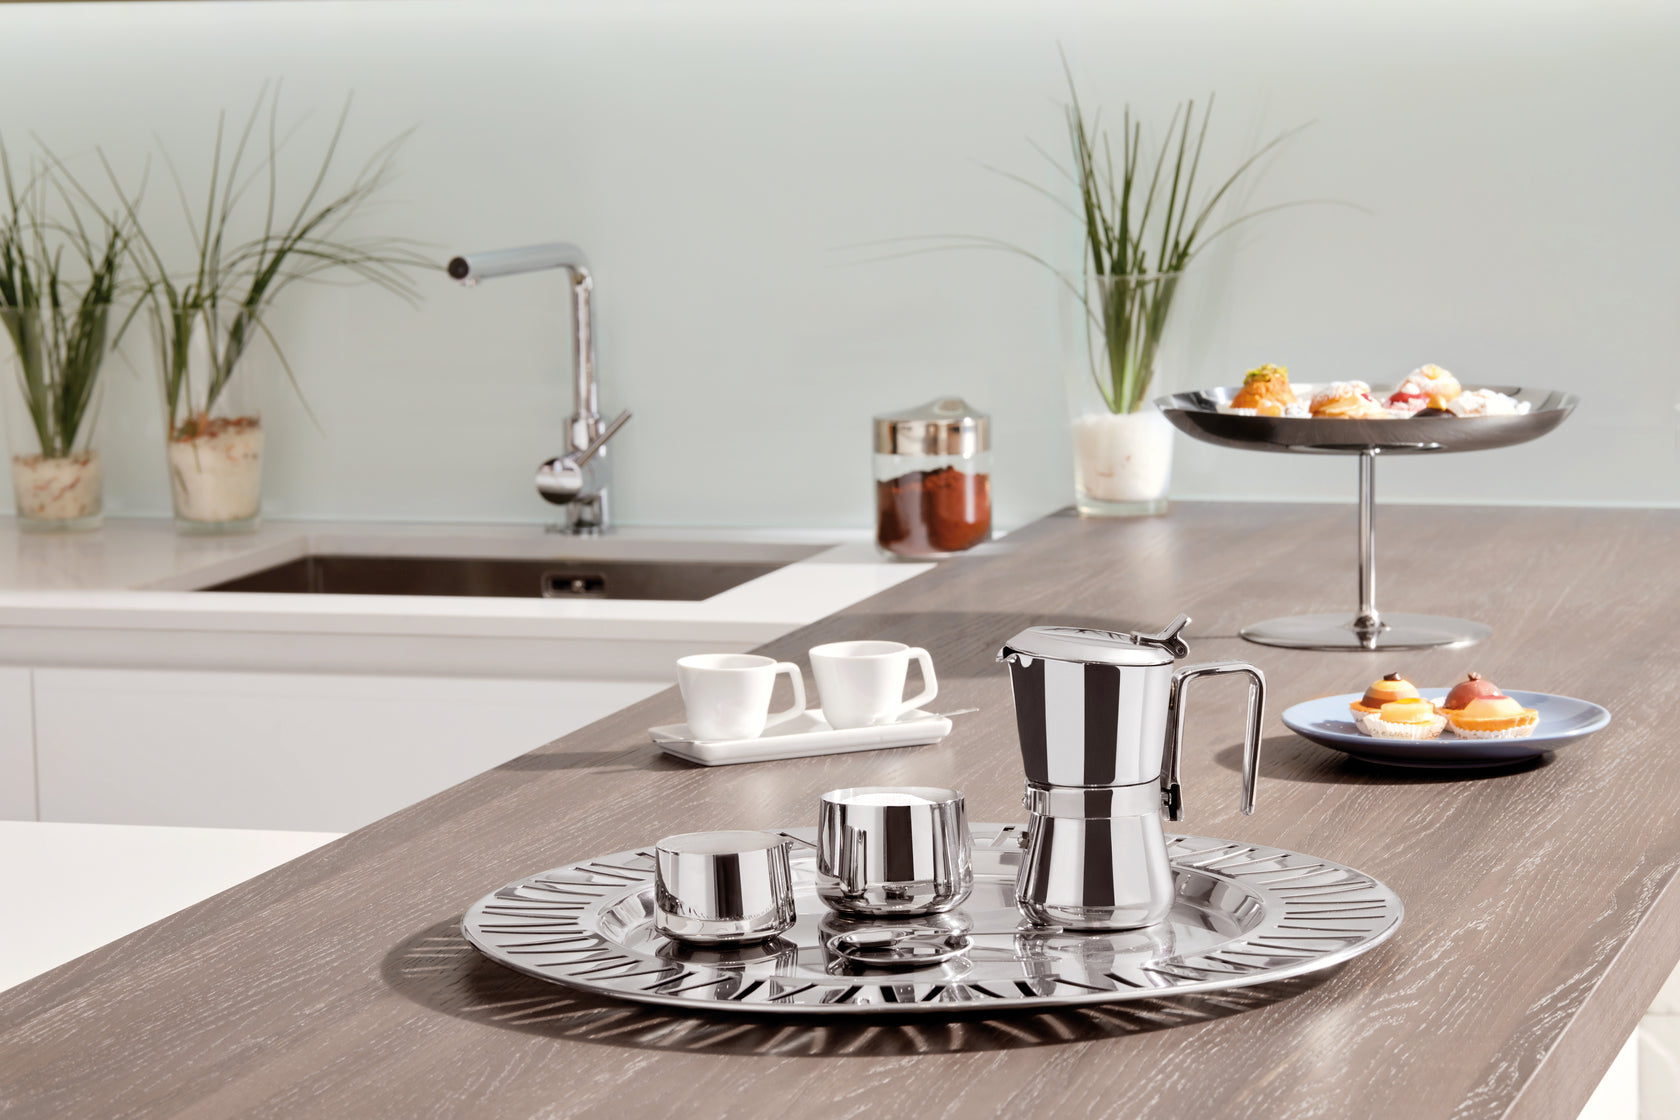 Giannini Restyling Induction Coffee Maker